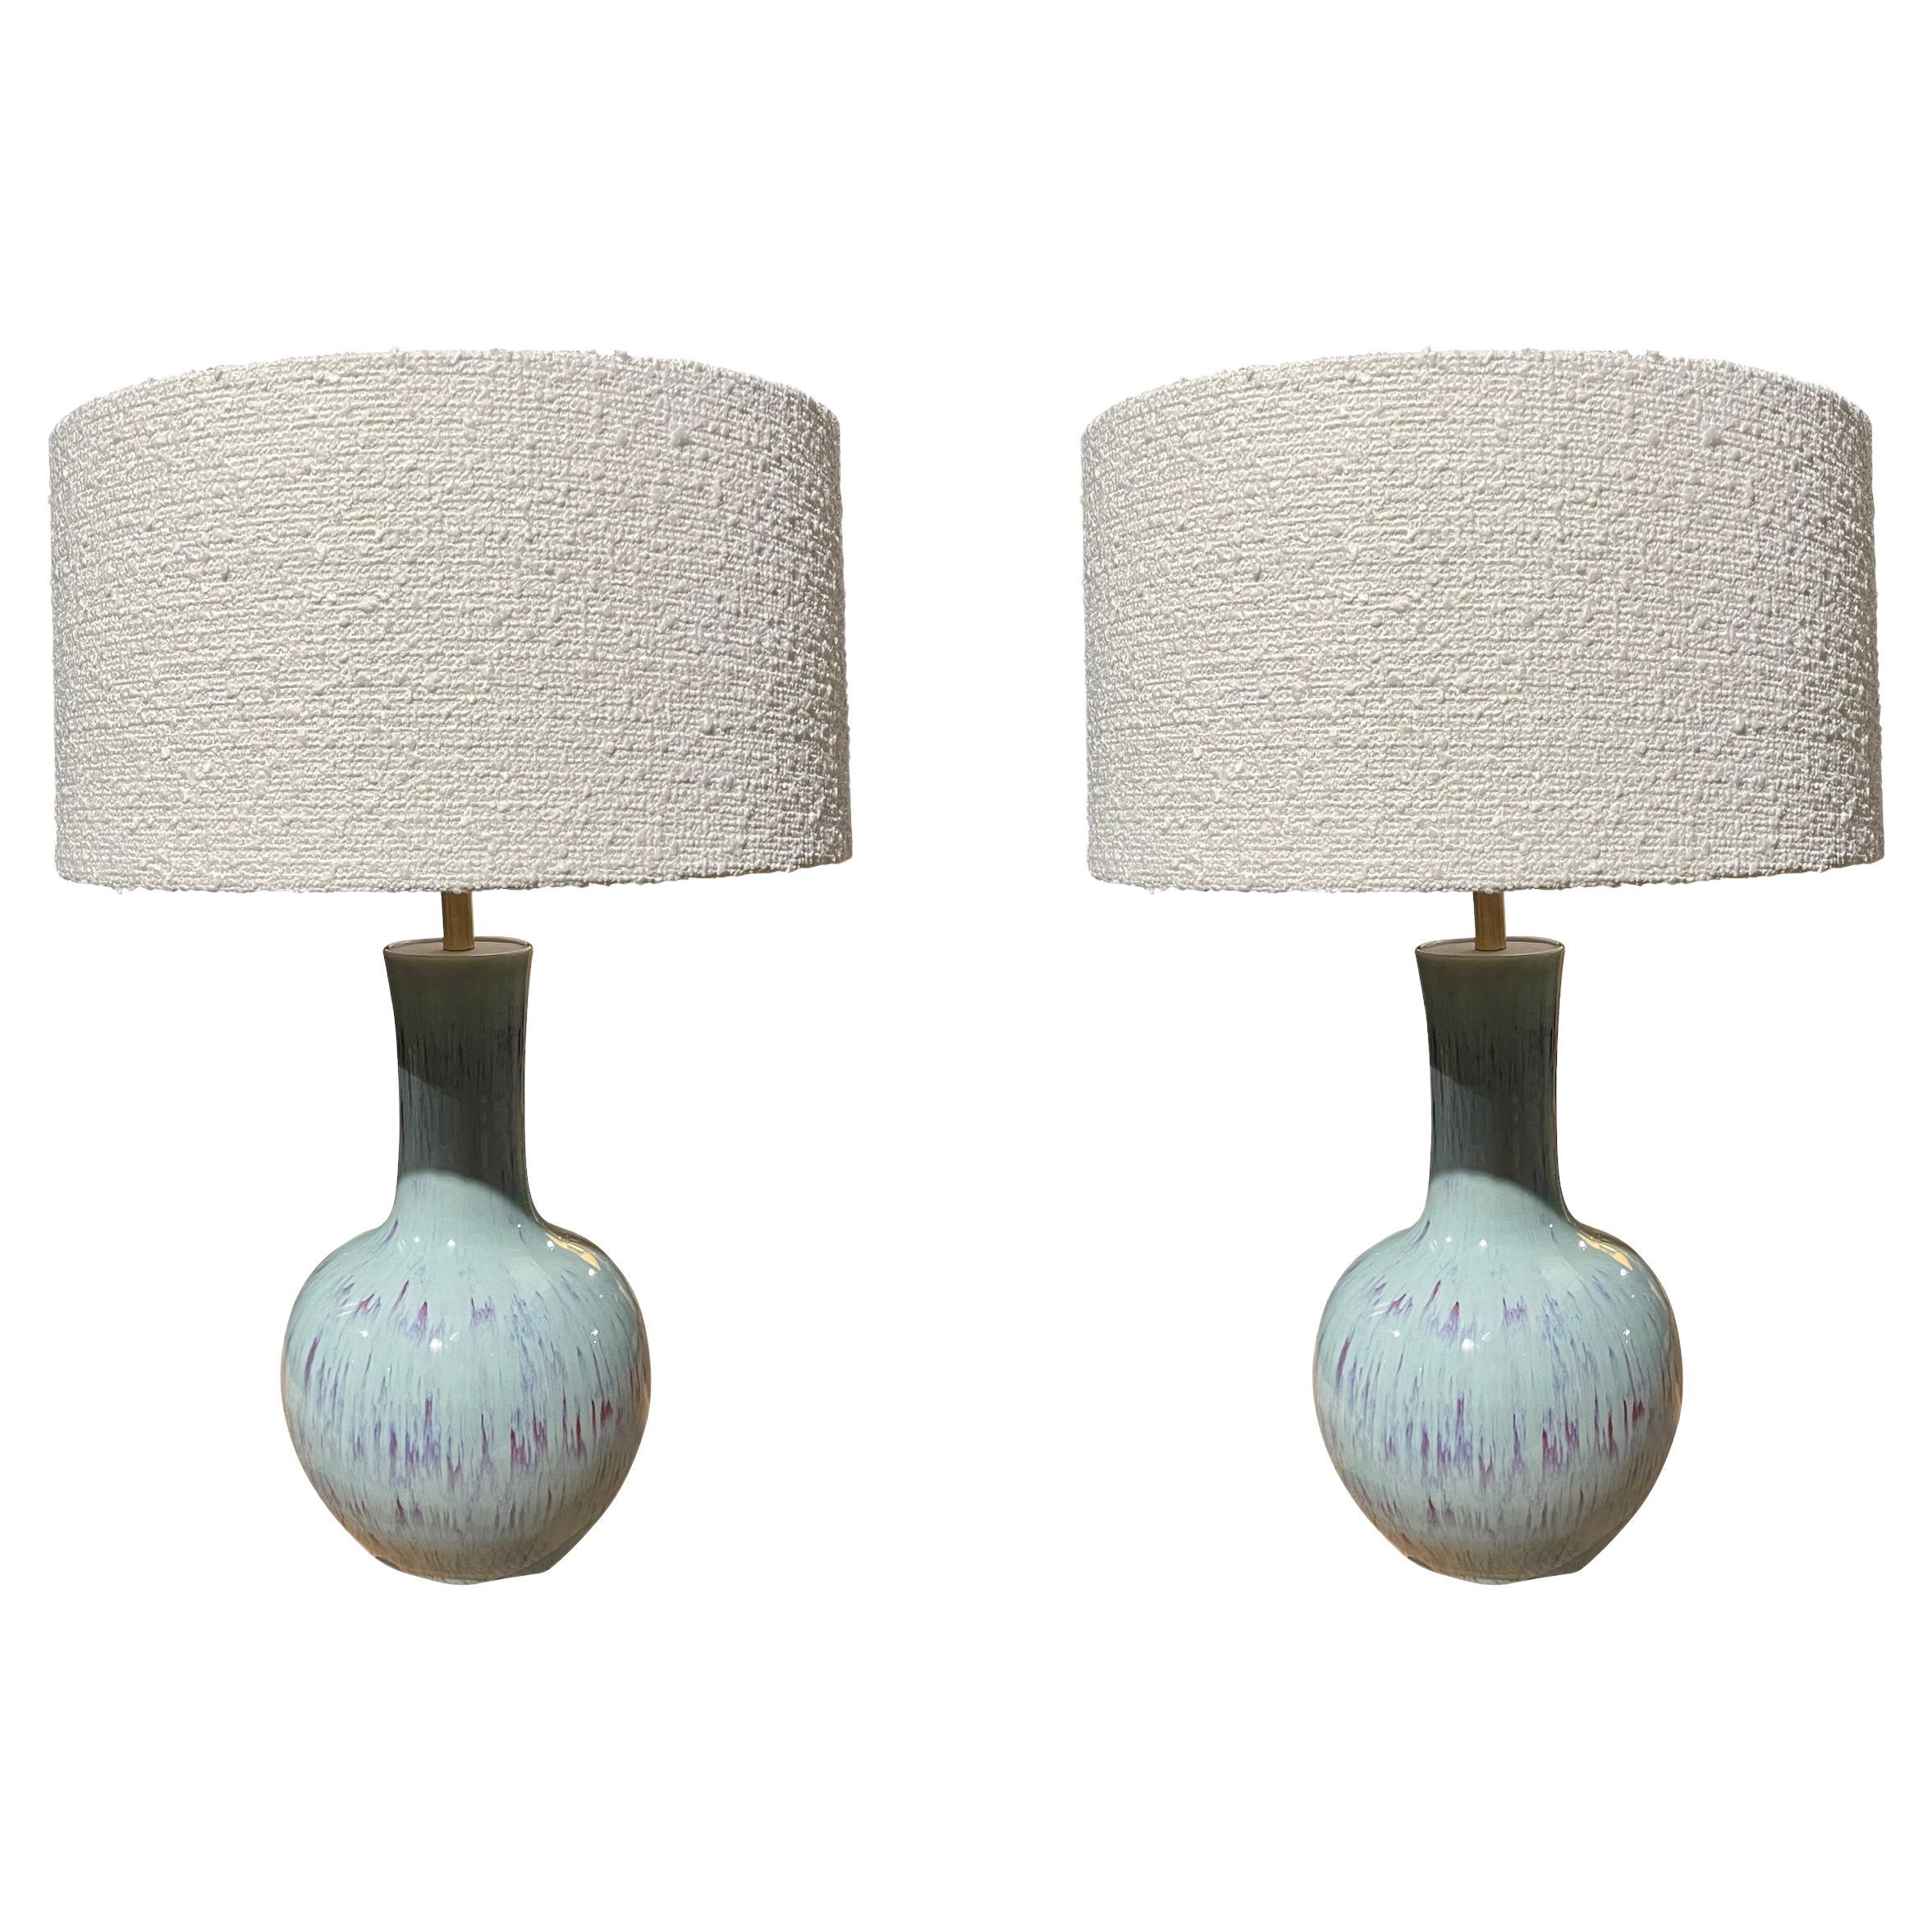 Pale Blue With Purple Pair Table Lamps With Shades, China, Contemporary